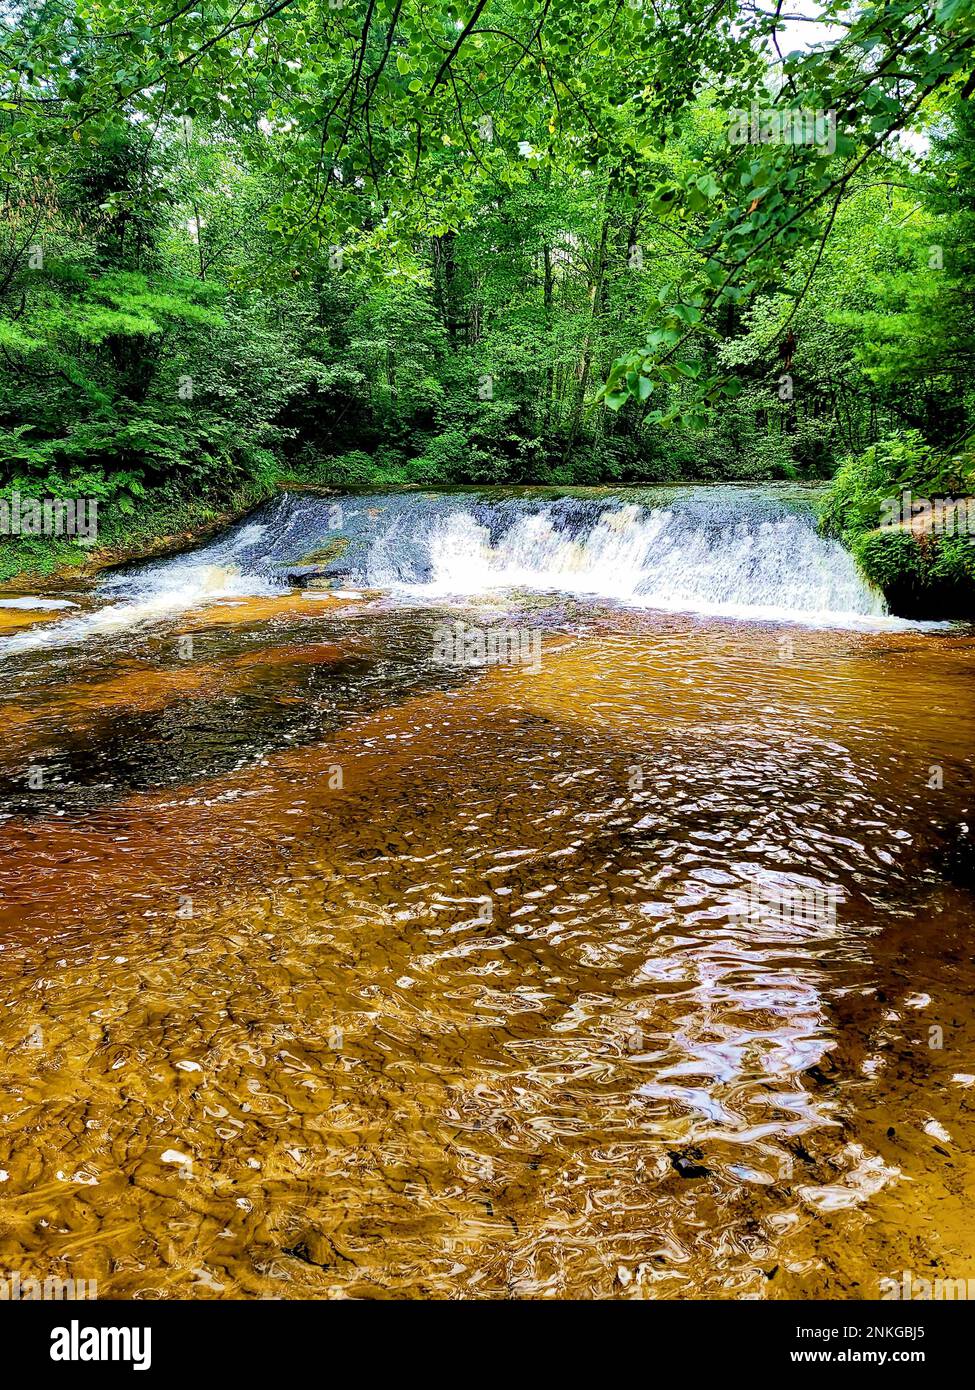 A scene of Trout Falls on the La Crosse River in the Pine View Recreation Area is shown Aug. 14, 2022, at Fort McCoy, Wis. The recreation area includes acres of publicly accessible land with hiking trails, Pine View Campground, Whitetail Ridge Ski Area, and Sportsman’s Range. Pine View Recreation Area offers four-season, year-round activities to include camping, hiking, fishing, and more. See more about the area at https://mccoy.armymwr.com/categories/outdoor-recreation. In 2022, the recreation area celebrated 50 years in use and the area is managed by the Fort McCoy Directorate of Family and Stock Photo